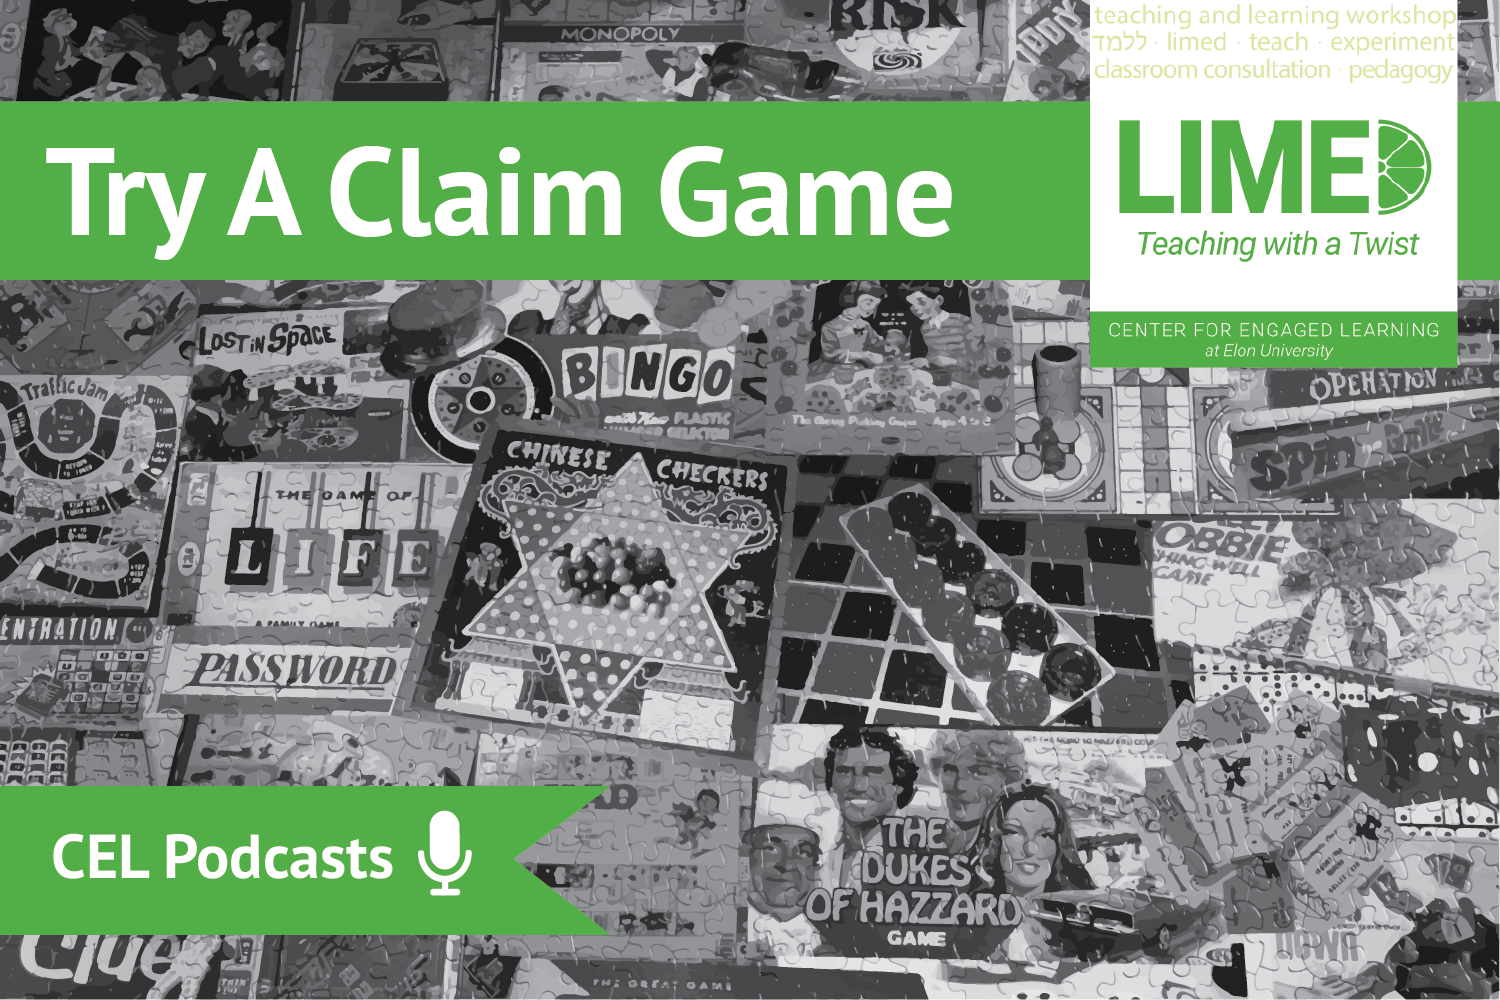 A black and white mosaic of classic and nostalgic board games such as checkers and The Game of Life. Overlayed text reads: “CEL Podcasts. Limed: Teaching with a Twist. Try A Claim Game”